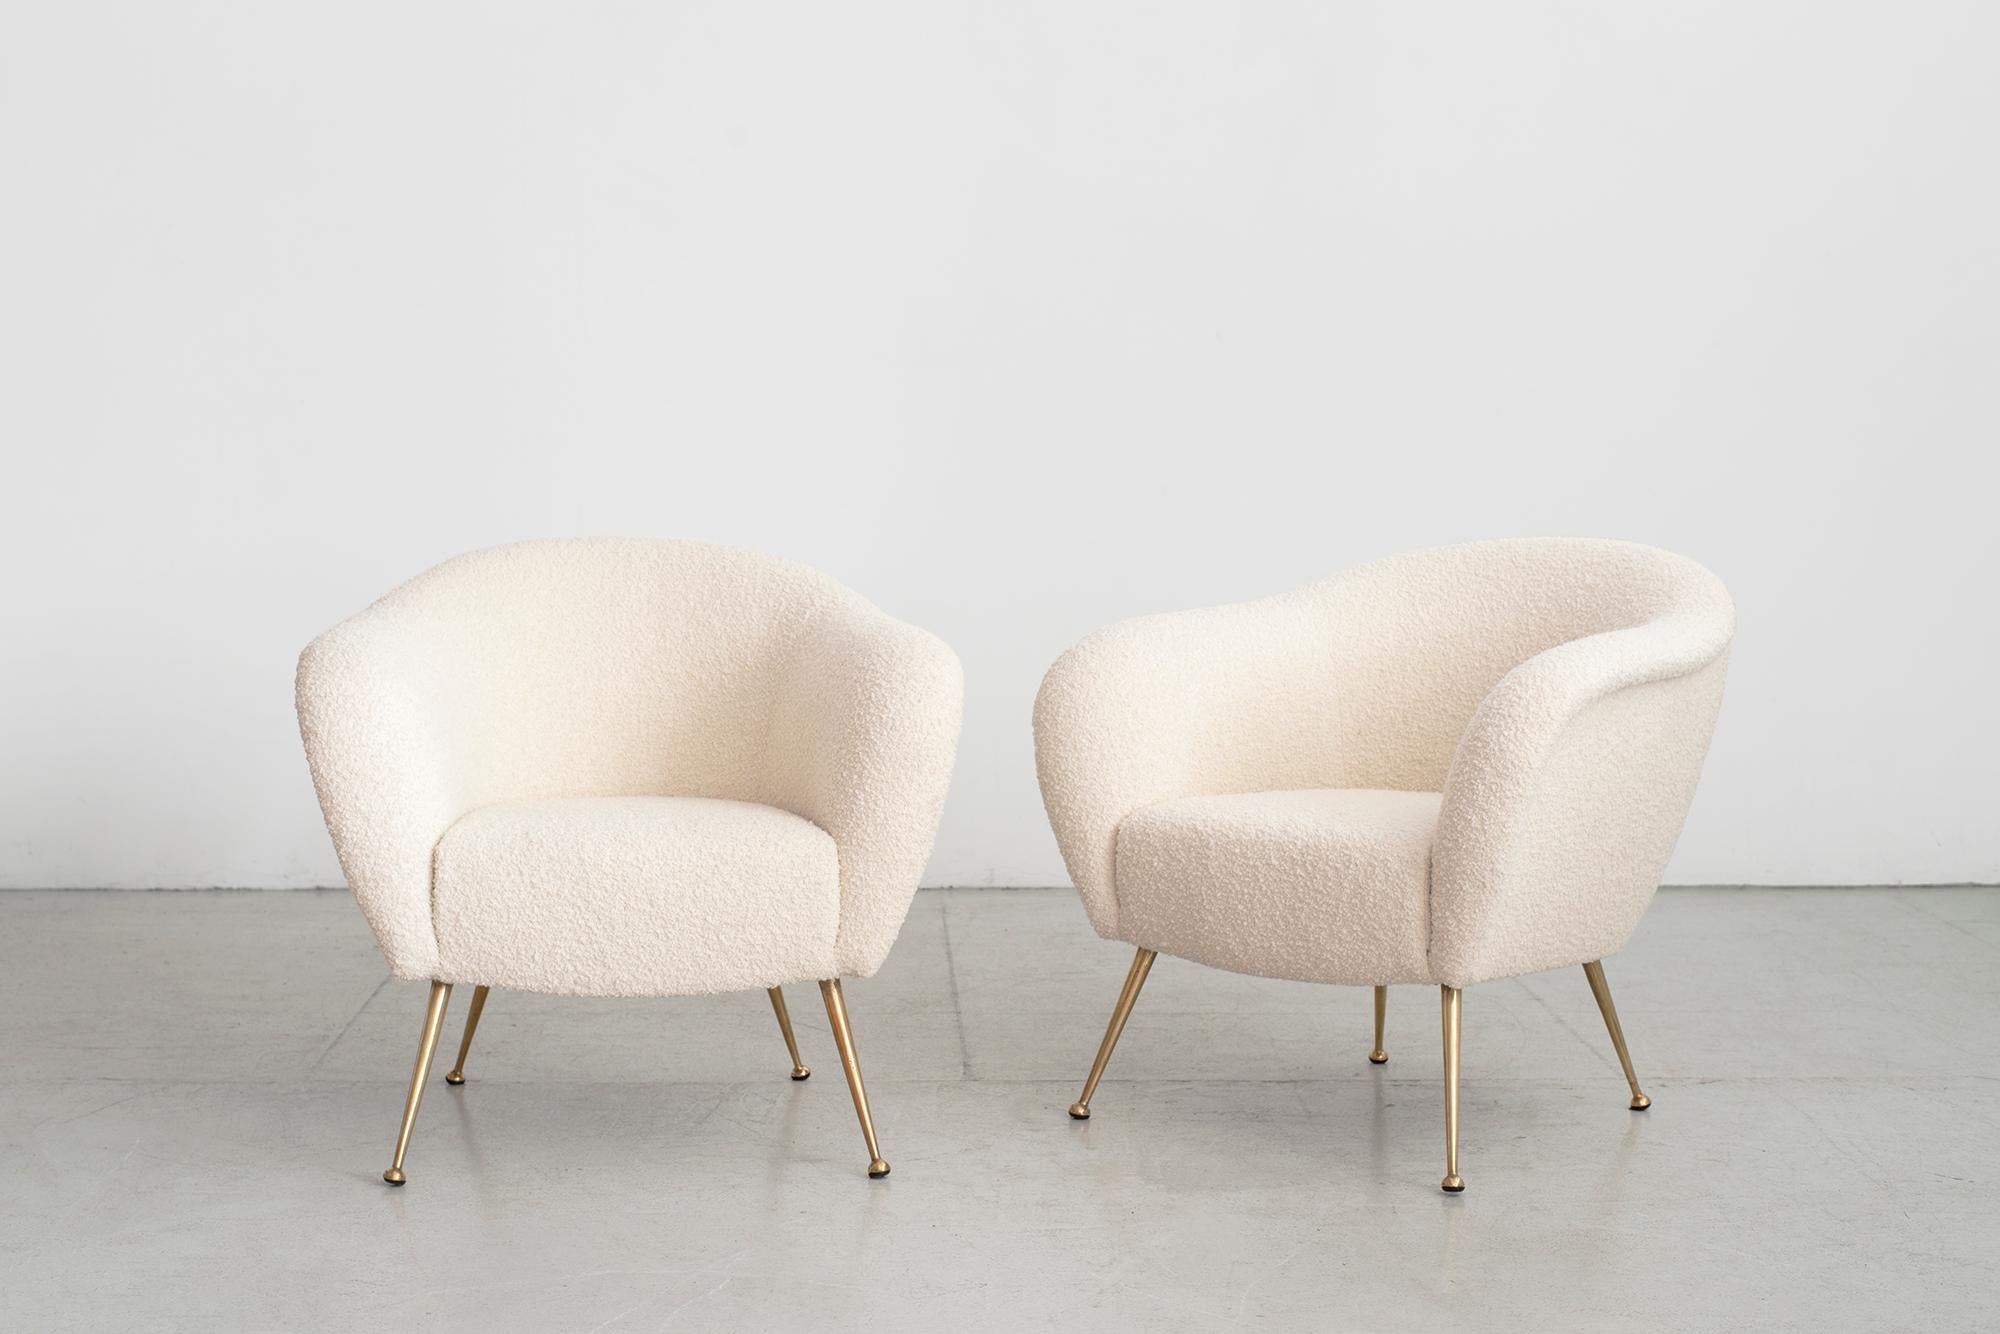 Pair of 1950s Italian armchairs with curved lines, brass legs
Nice sleek shape and curves.
Reupholstered in creamy white boucle.